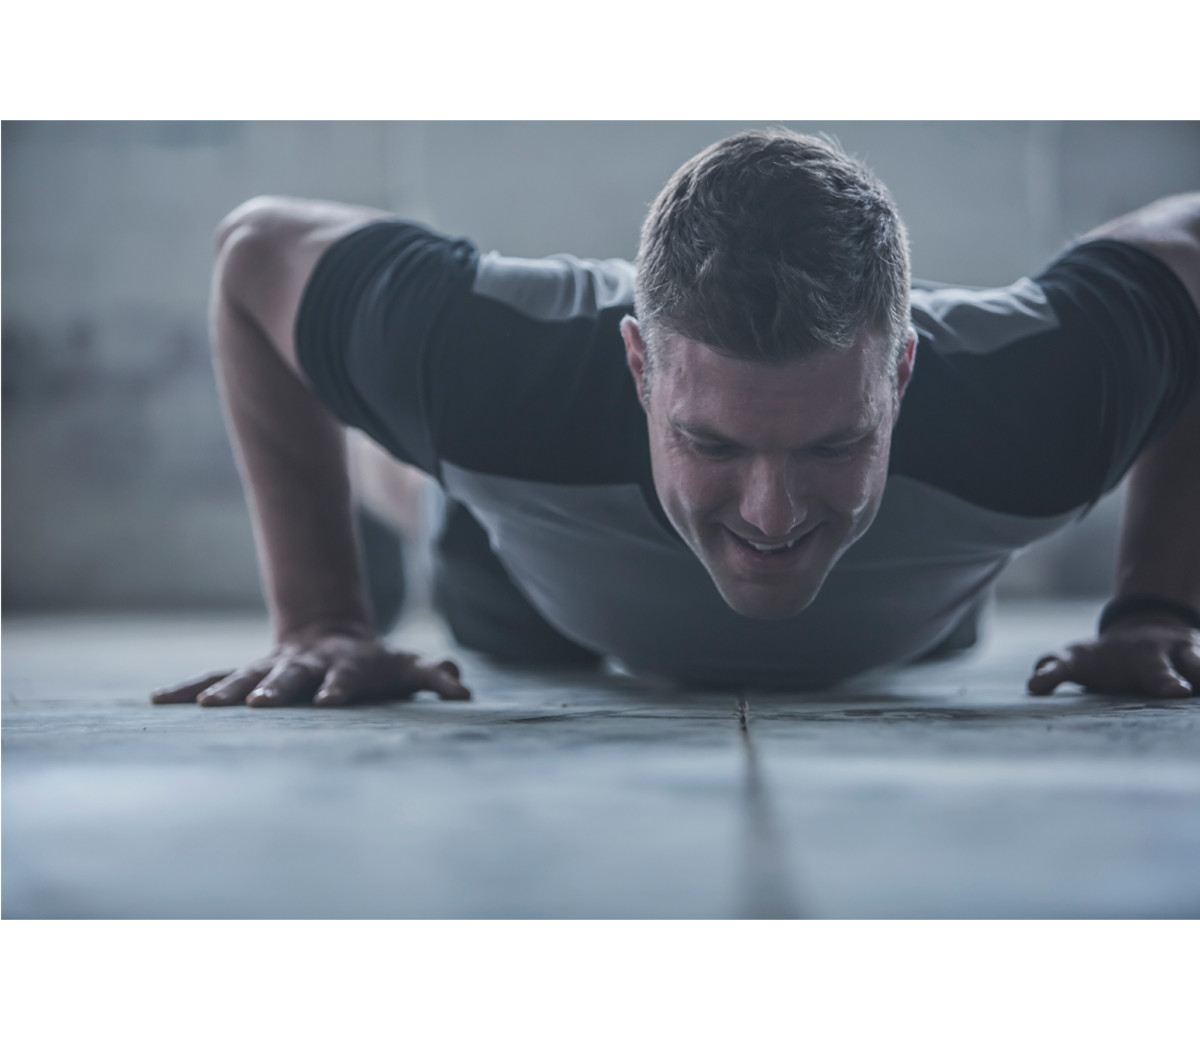 Building Power with Push-Ups  NASM Guide to Push-Ups [Part 5]